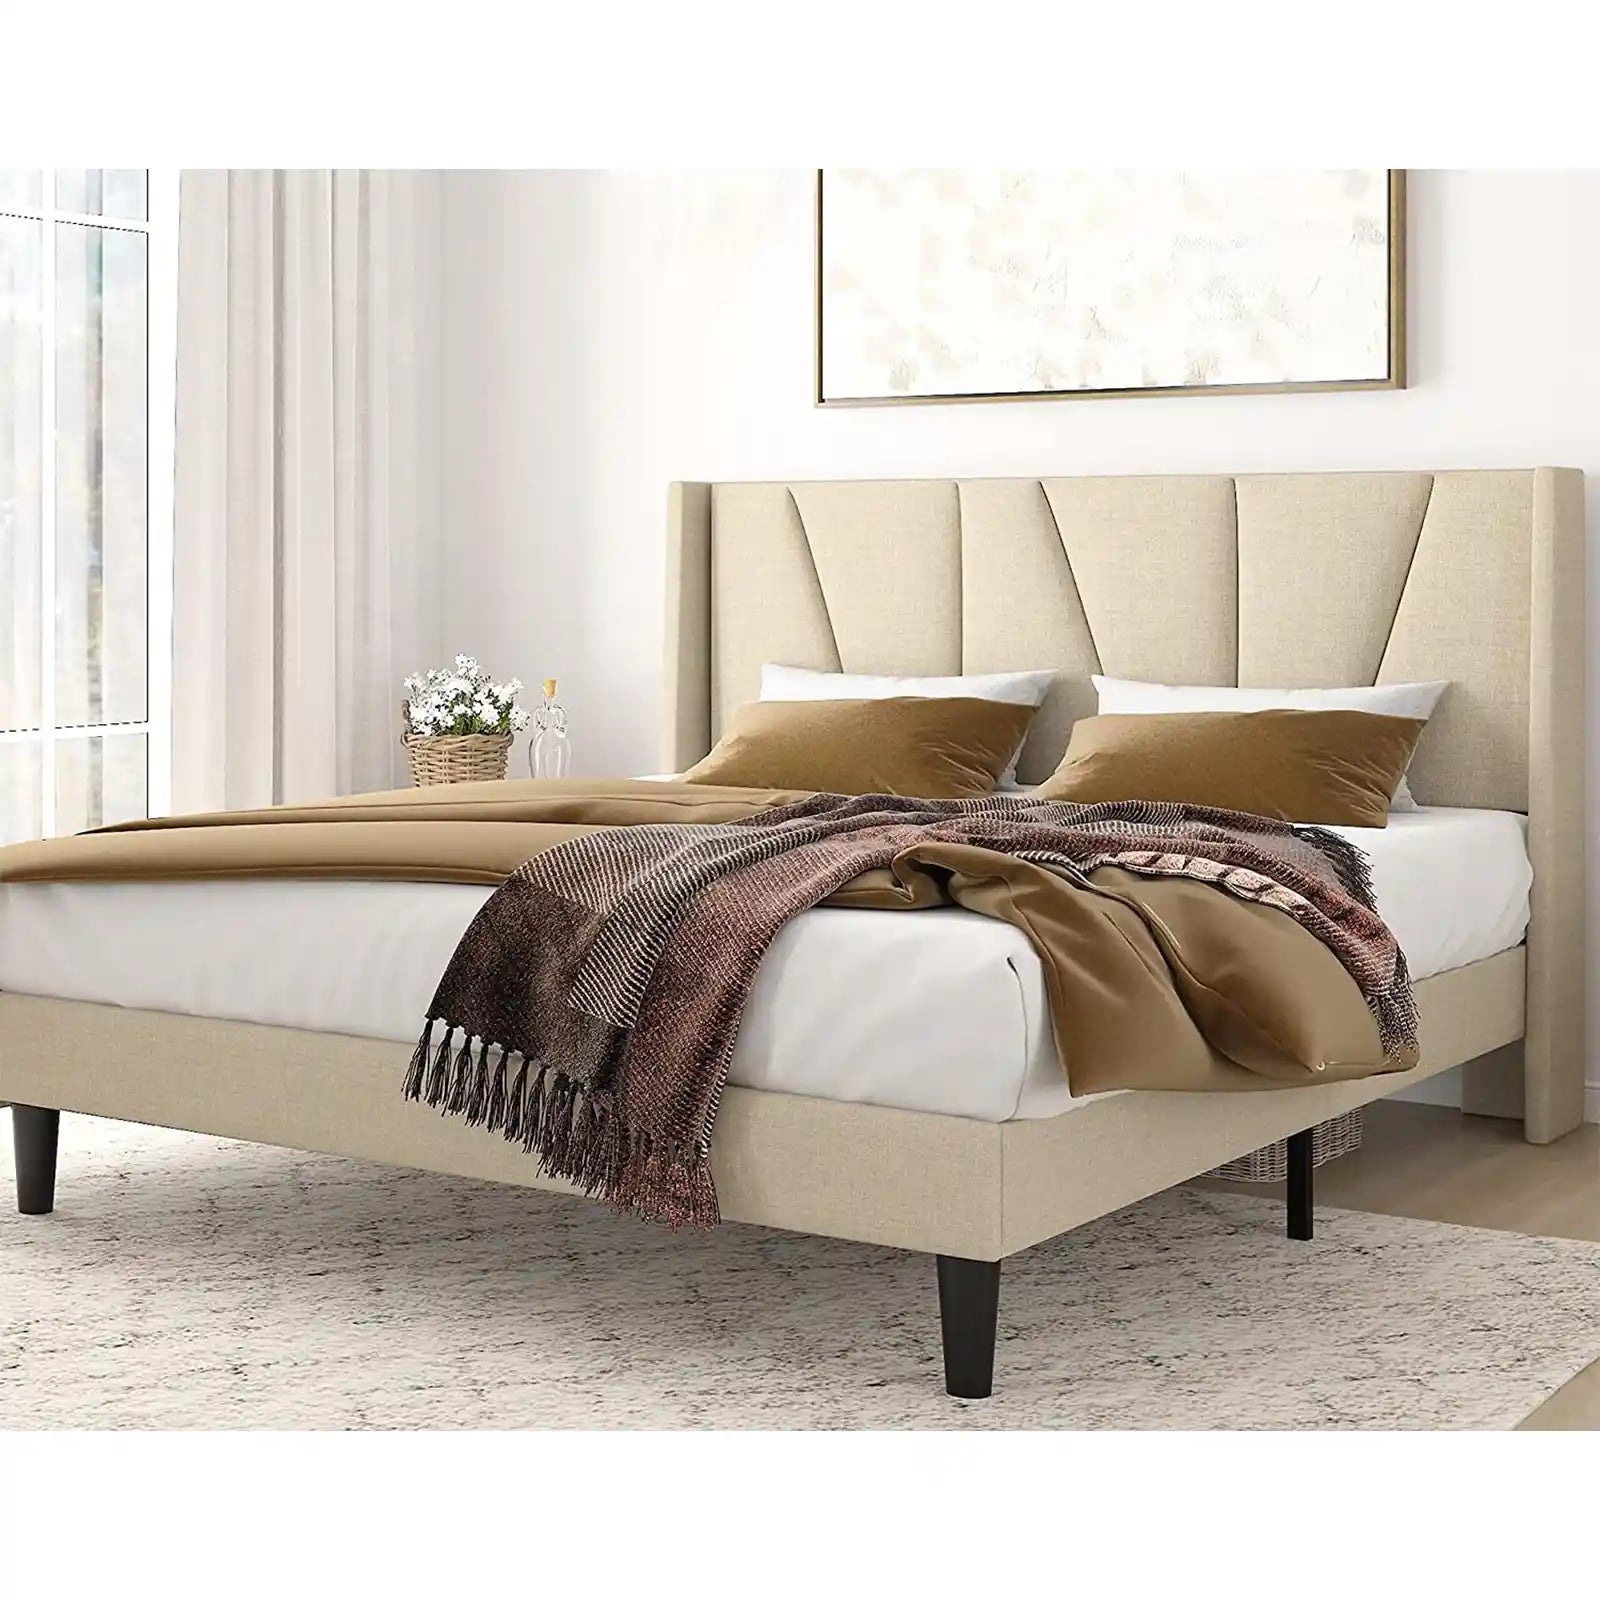 Upholstered Platform Bed Frame with Wingback & Geometric Headboard